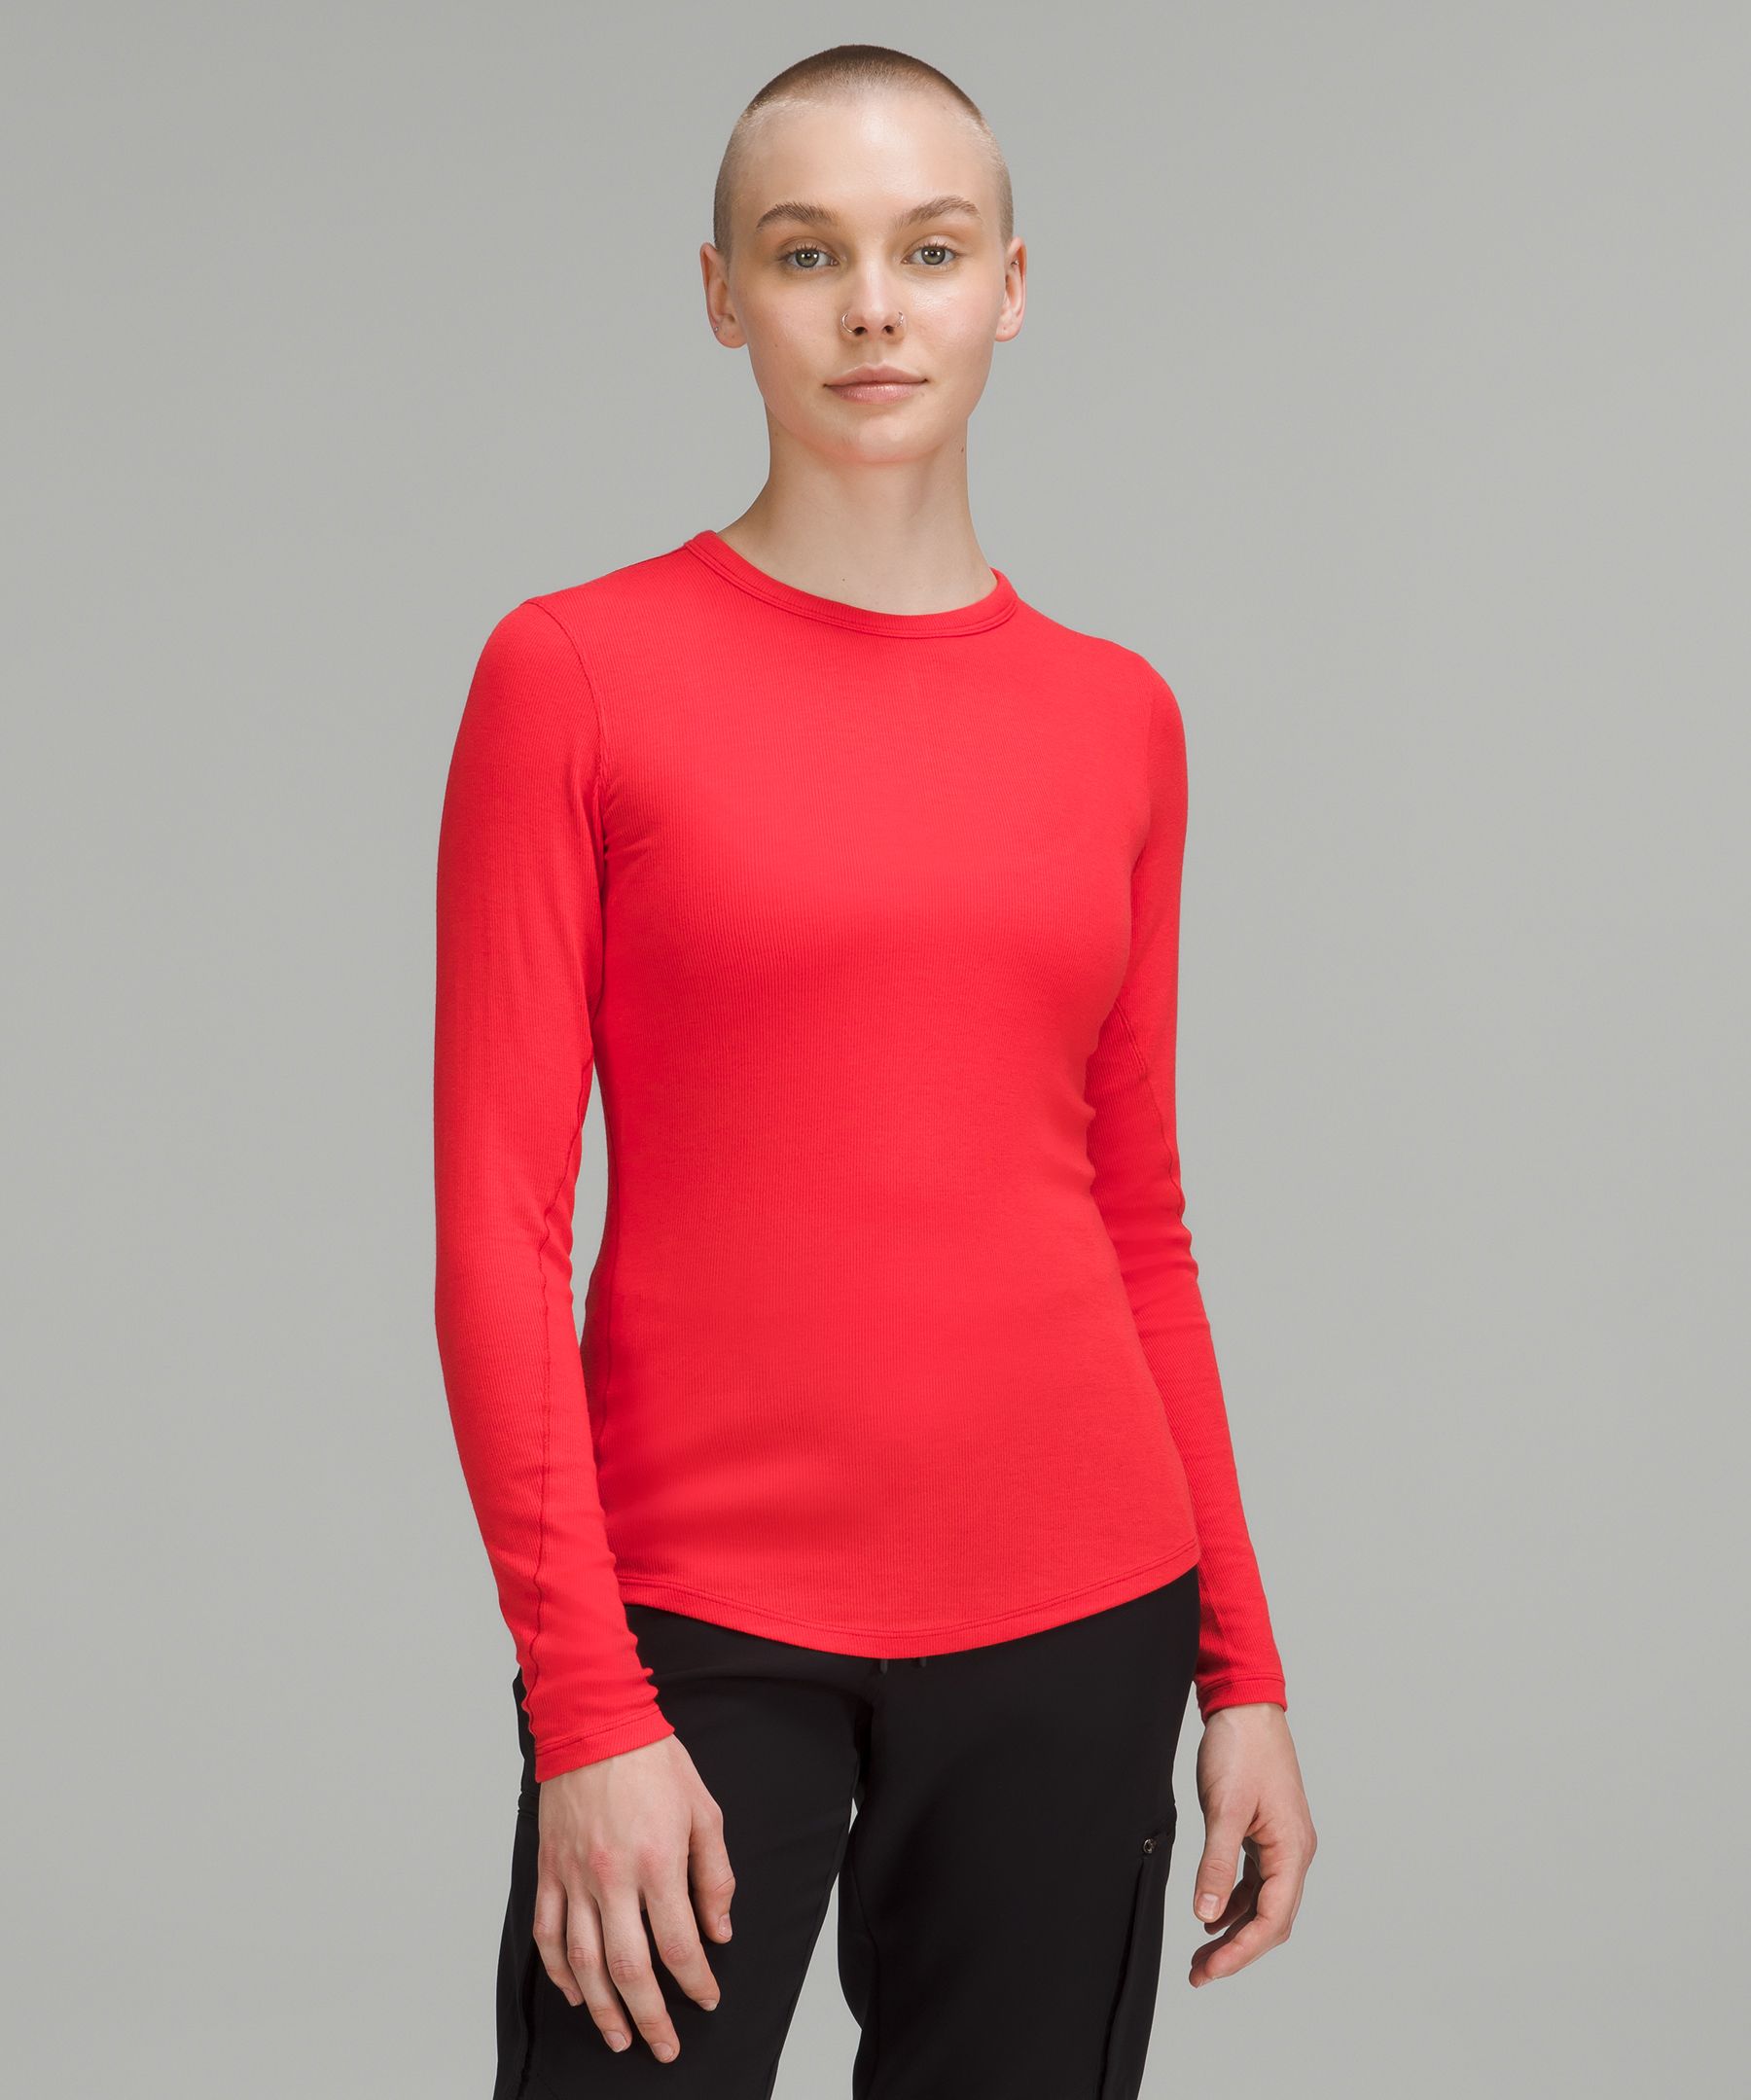 Lululemon Hold Tight Long Sleeve Shirt In Love Red